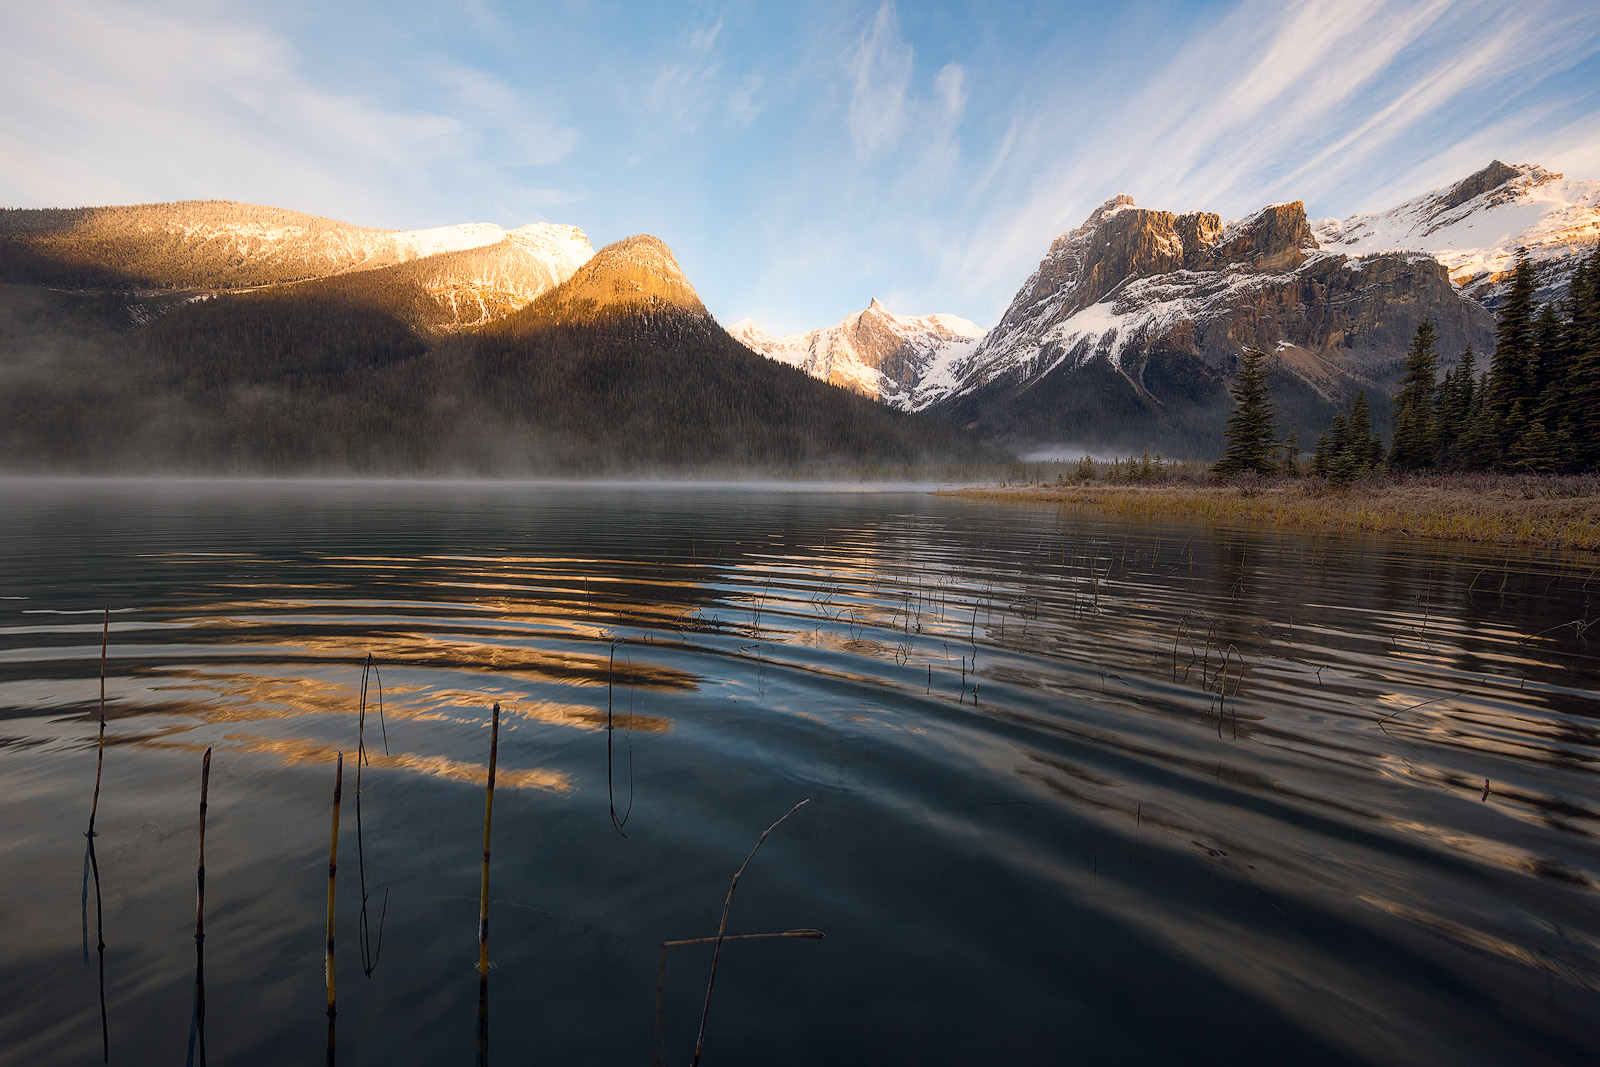 The ripple of a wave cuts through reflections of the mountains beyond Emerald Lake.